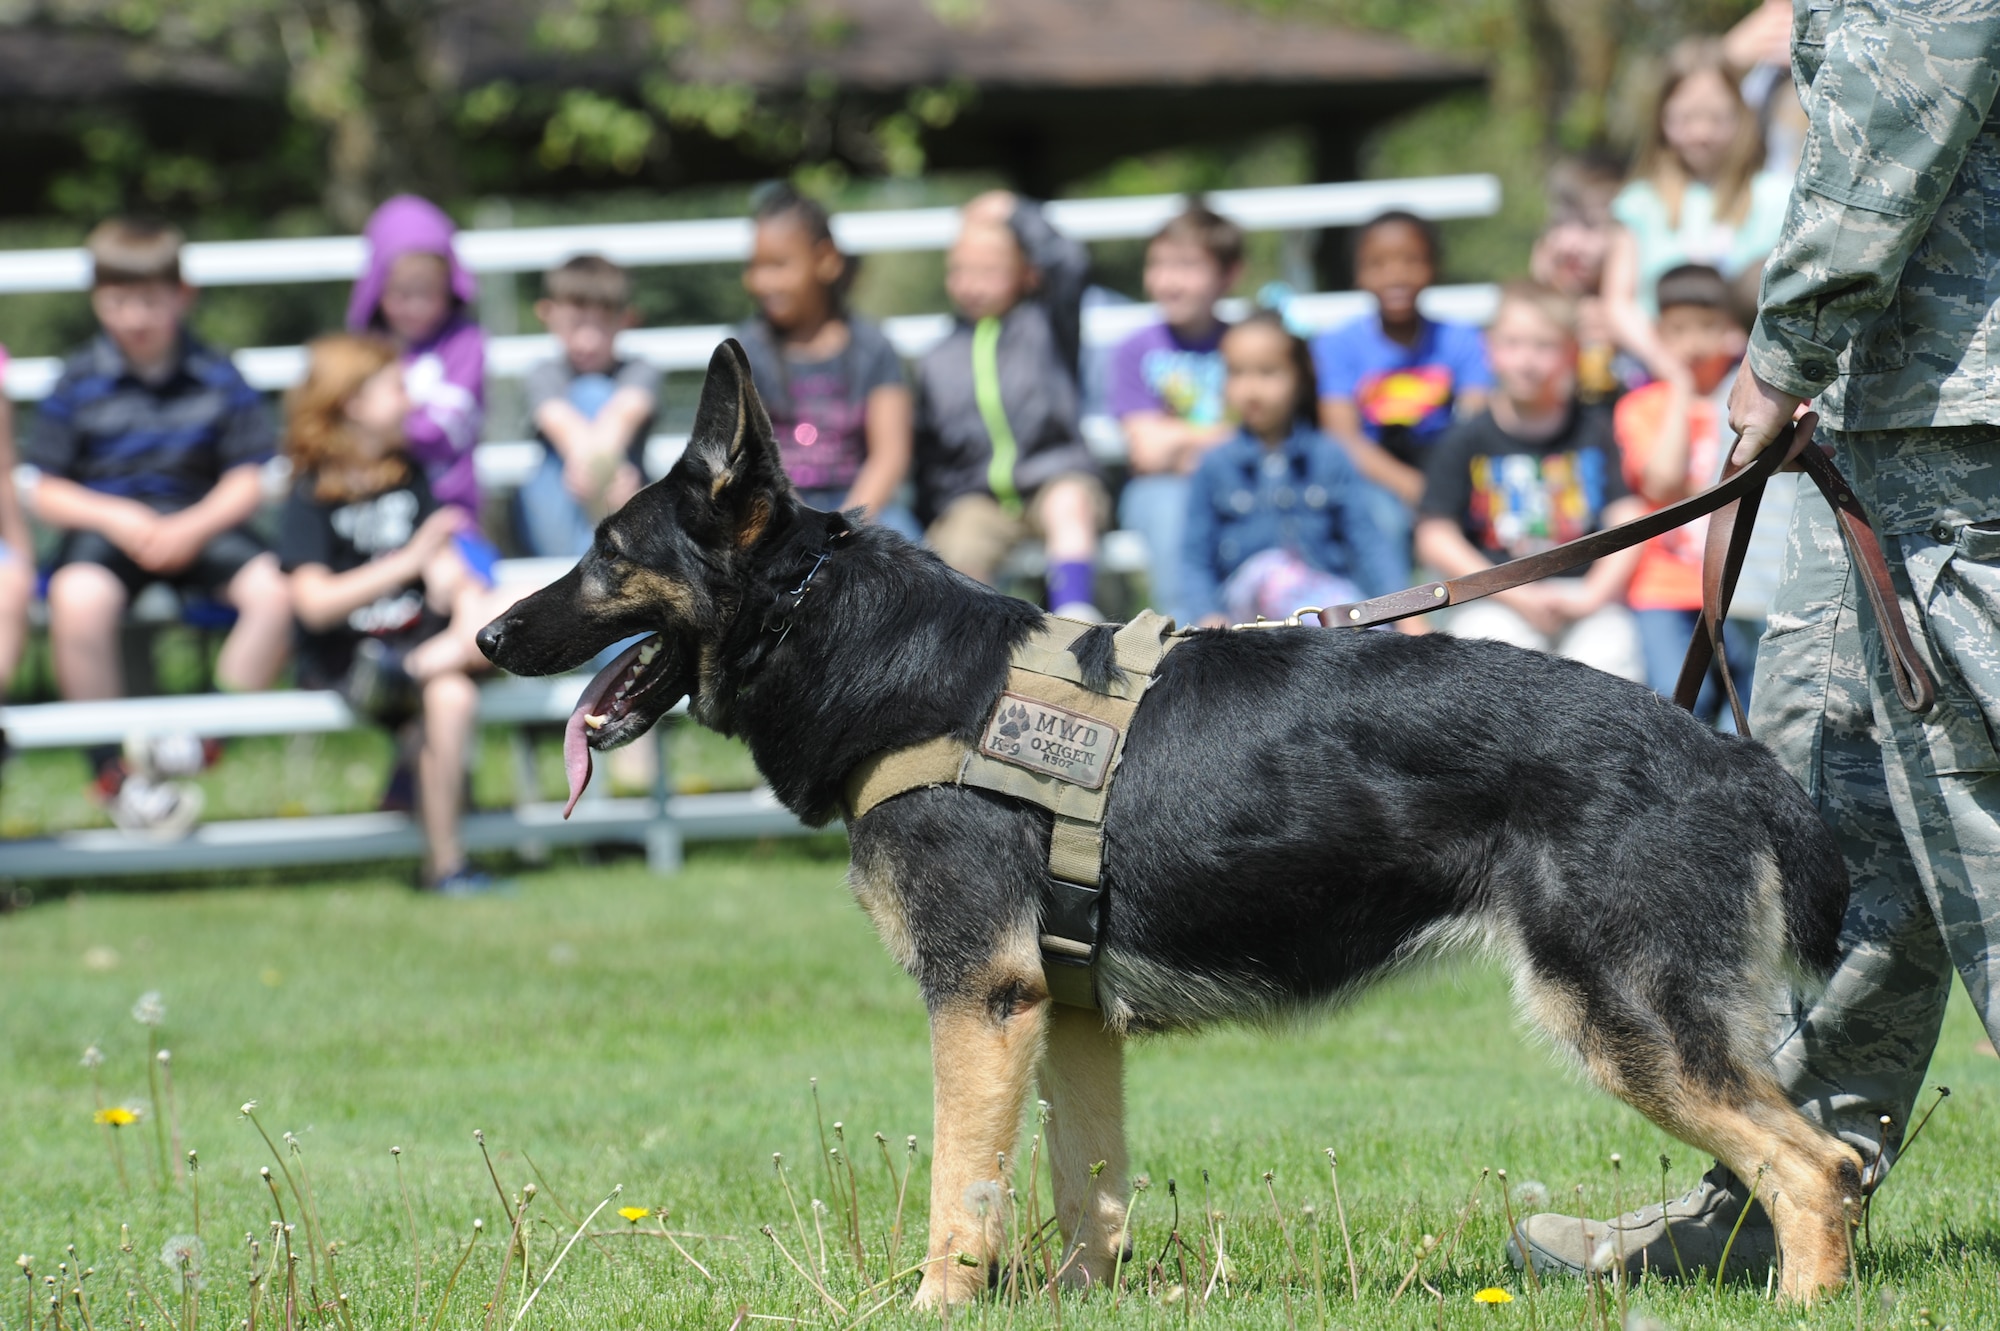 Children from Michael Anderson Elementary School watch as a 92nd Security Forces Squadron Military Working Dog, Oxi, demonstrates his abilities May 11, 2015, at Fairchild Air Force Base, Wash. The children spent the afternoon at the law enforcement expo that consisted of police vehicles, trying on police equipment and speaking with law enforcement officials about their jobs and duties. (U.S. Air Force photo/Airman 1st Class Nicolo J. Daniello)